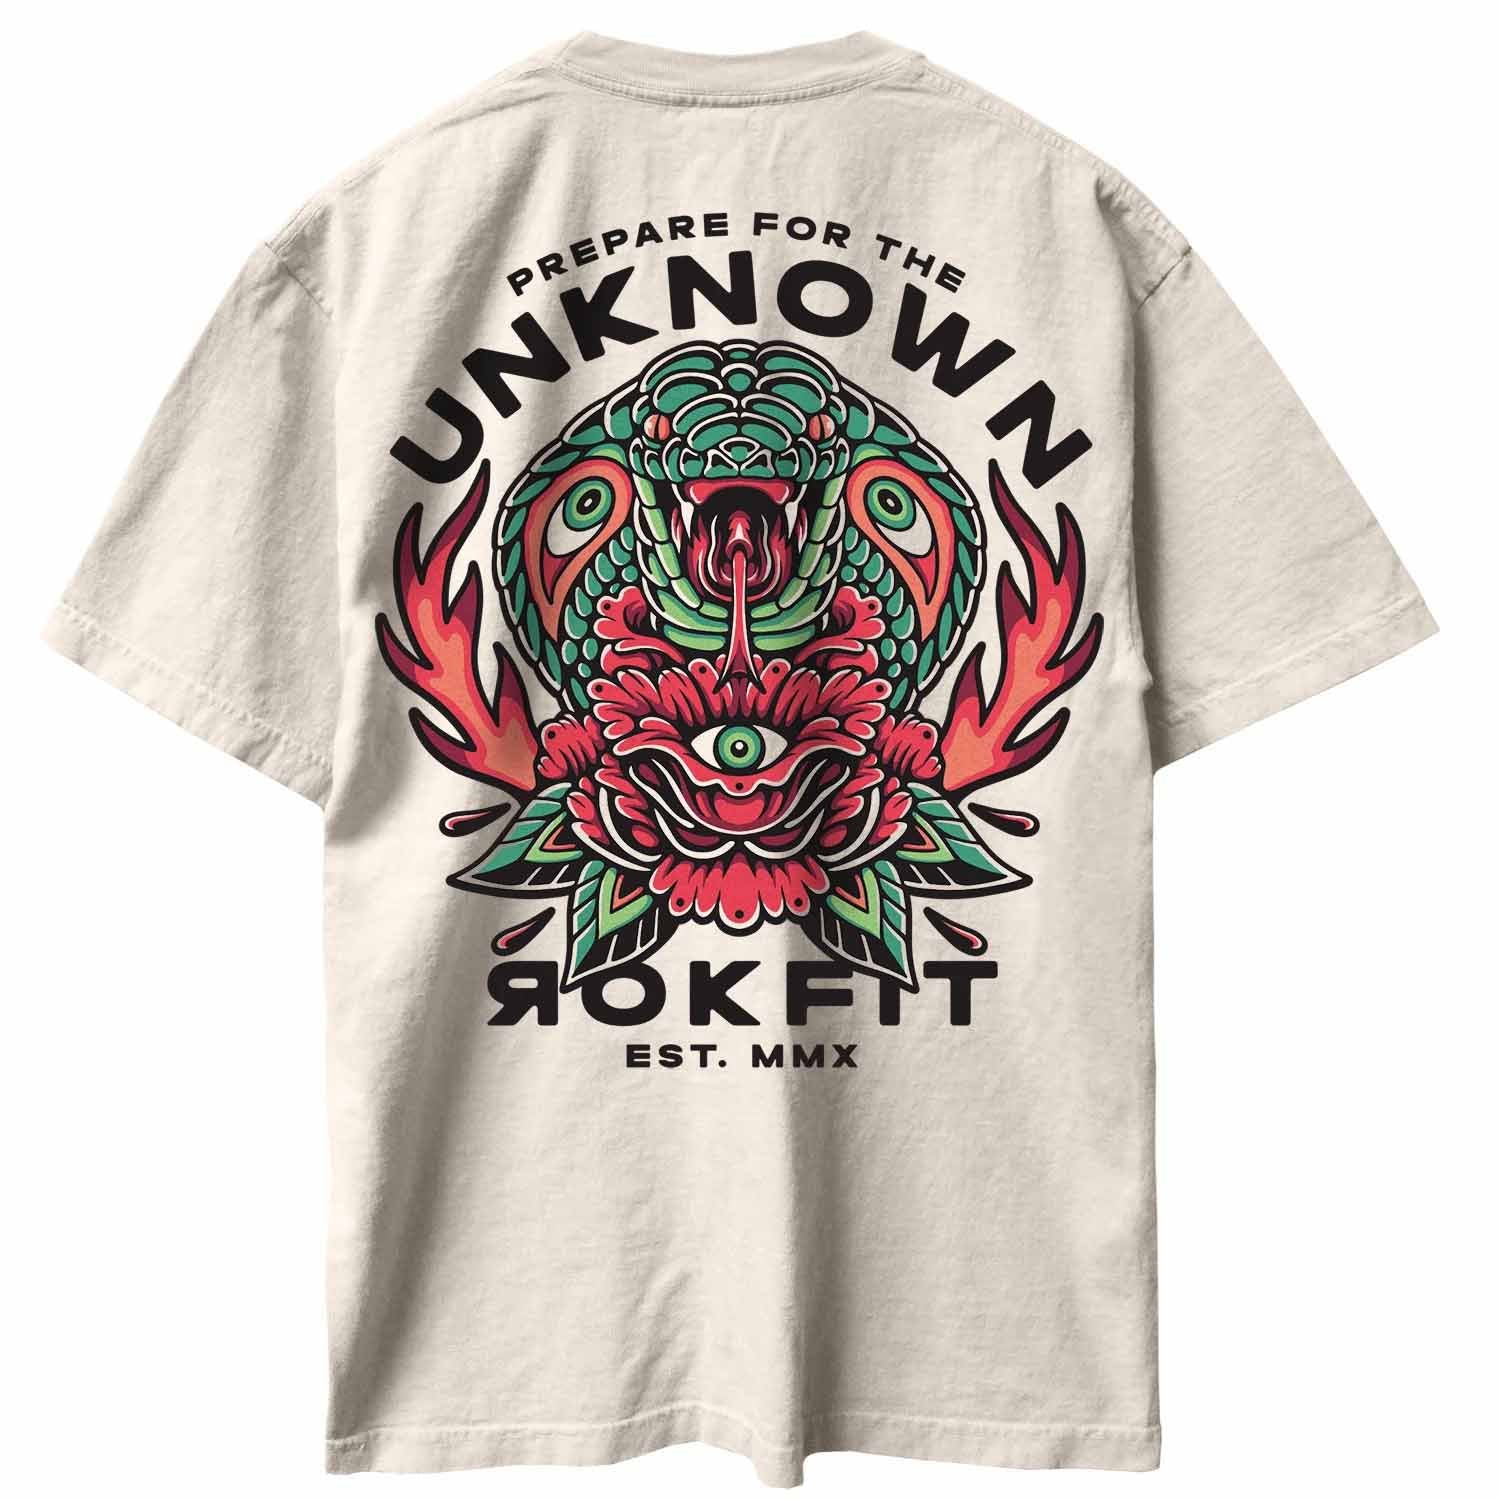 Prepare For The Unknown T-Shirt Oversize